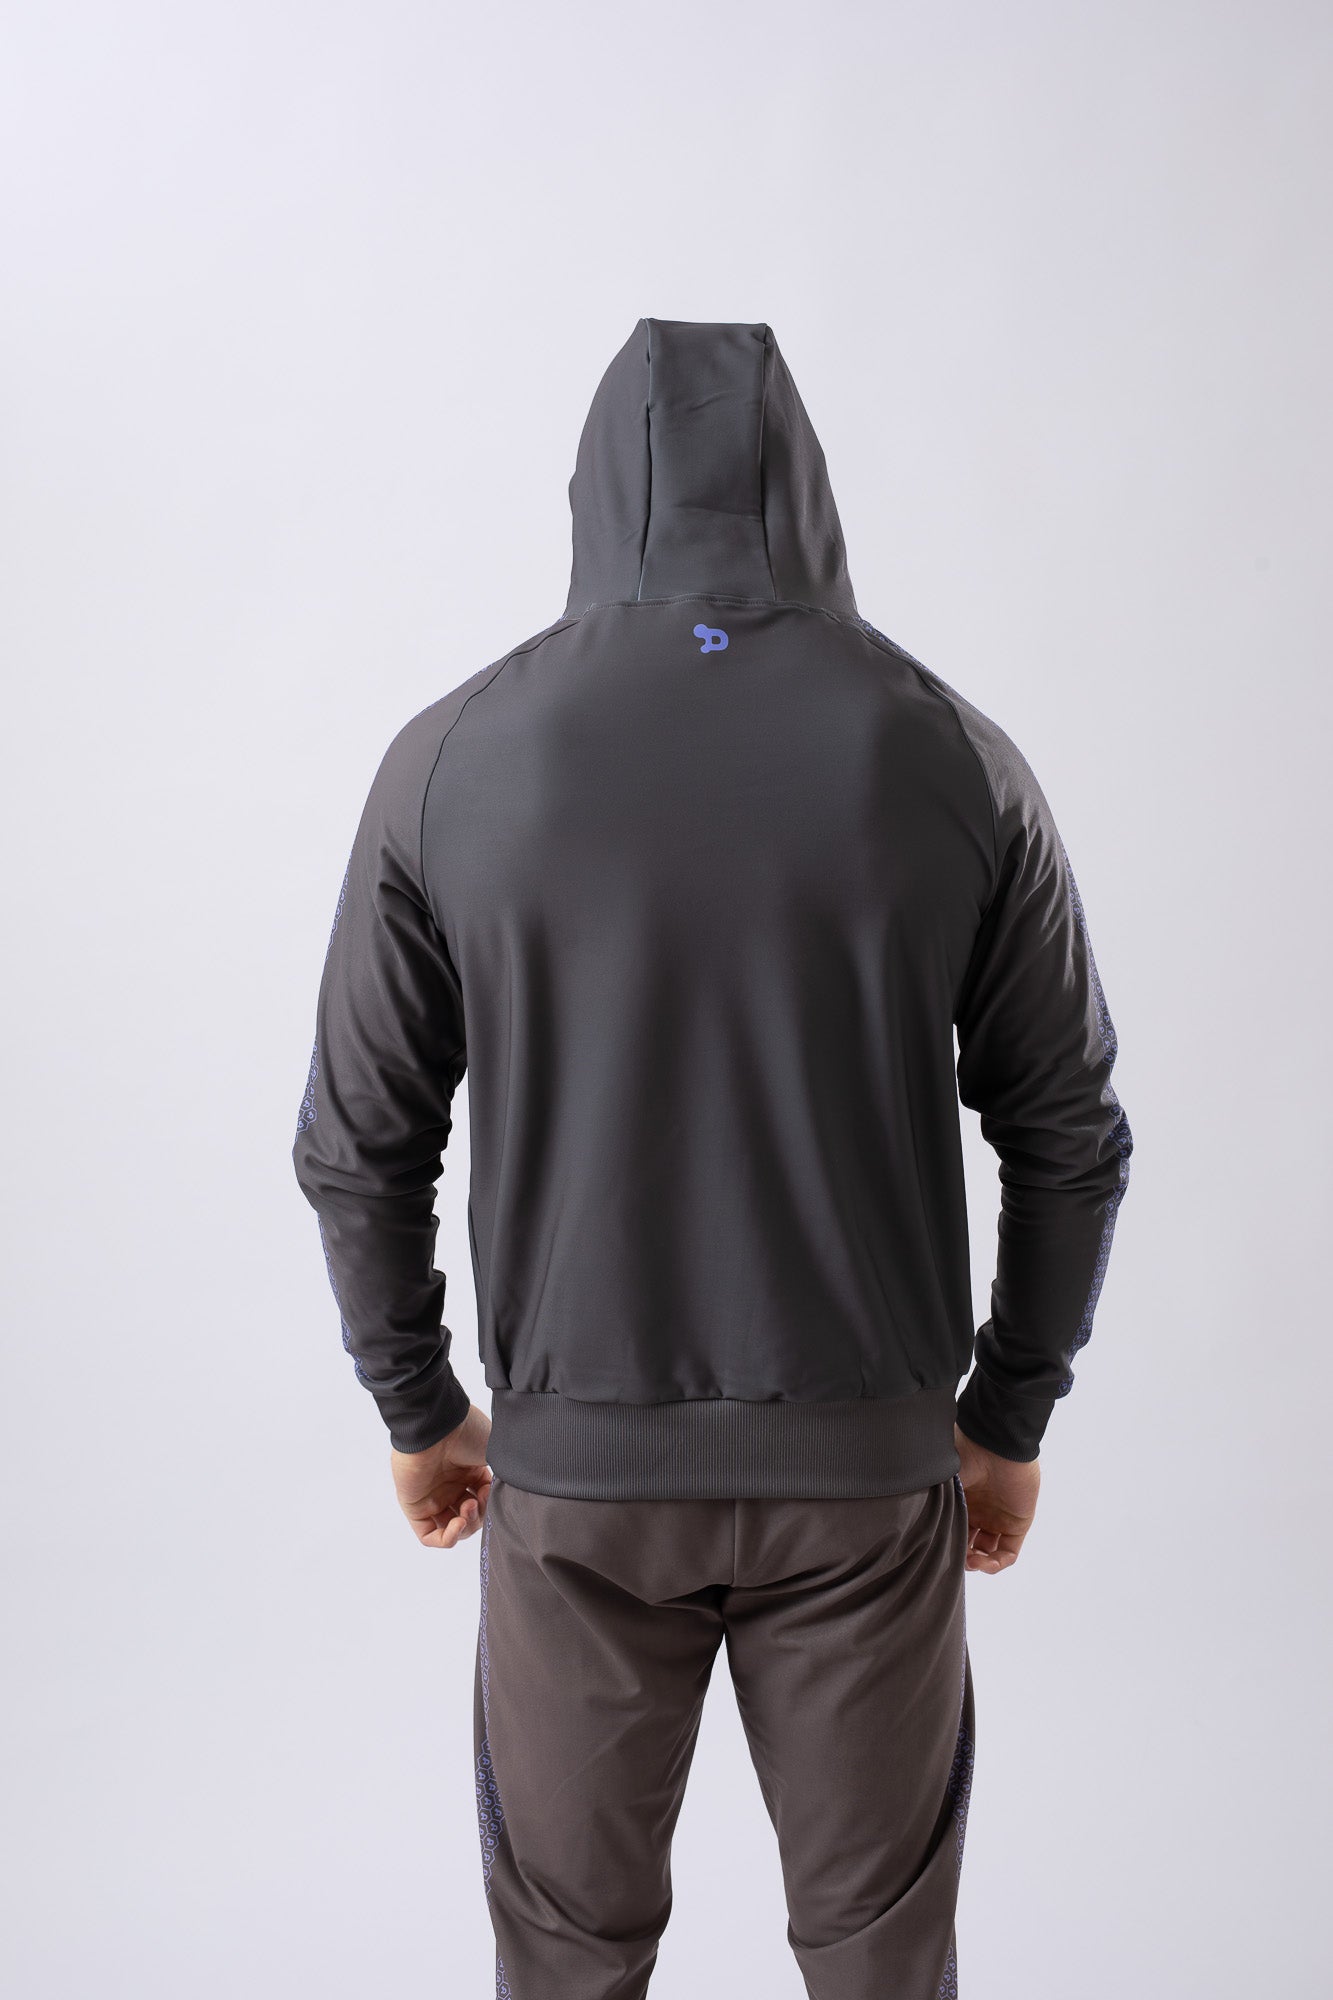 CoreD Pro Pullover - Mens - Very Peri Collection